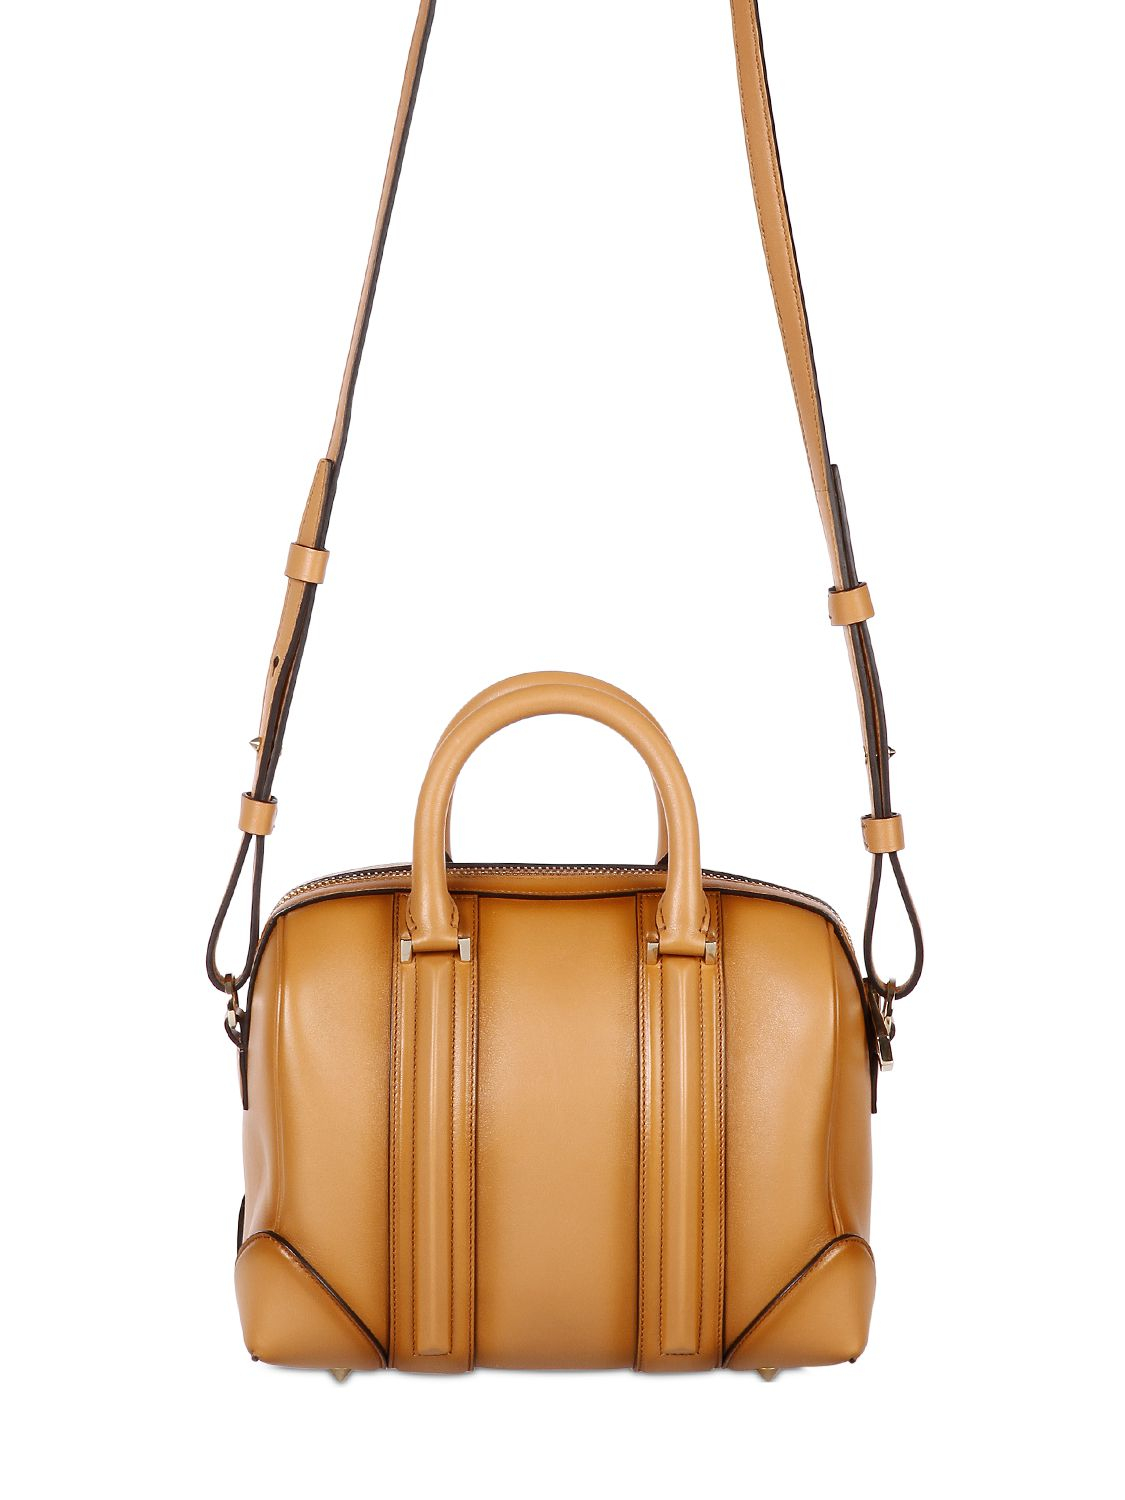 Lyst - Givenchy Mini Lucrezia Vintage Leather Bag in Brown